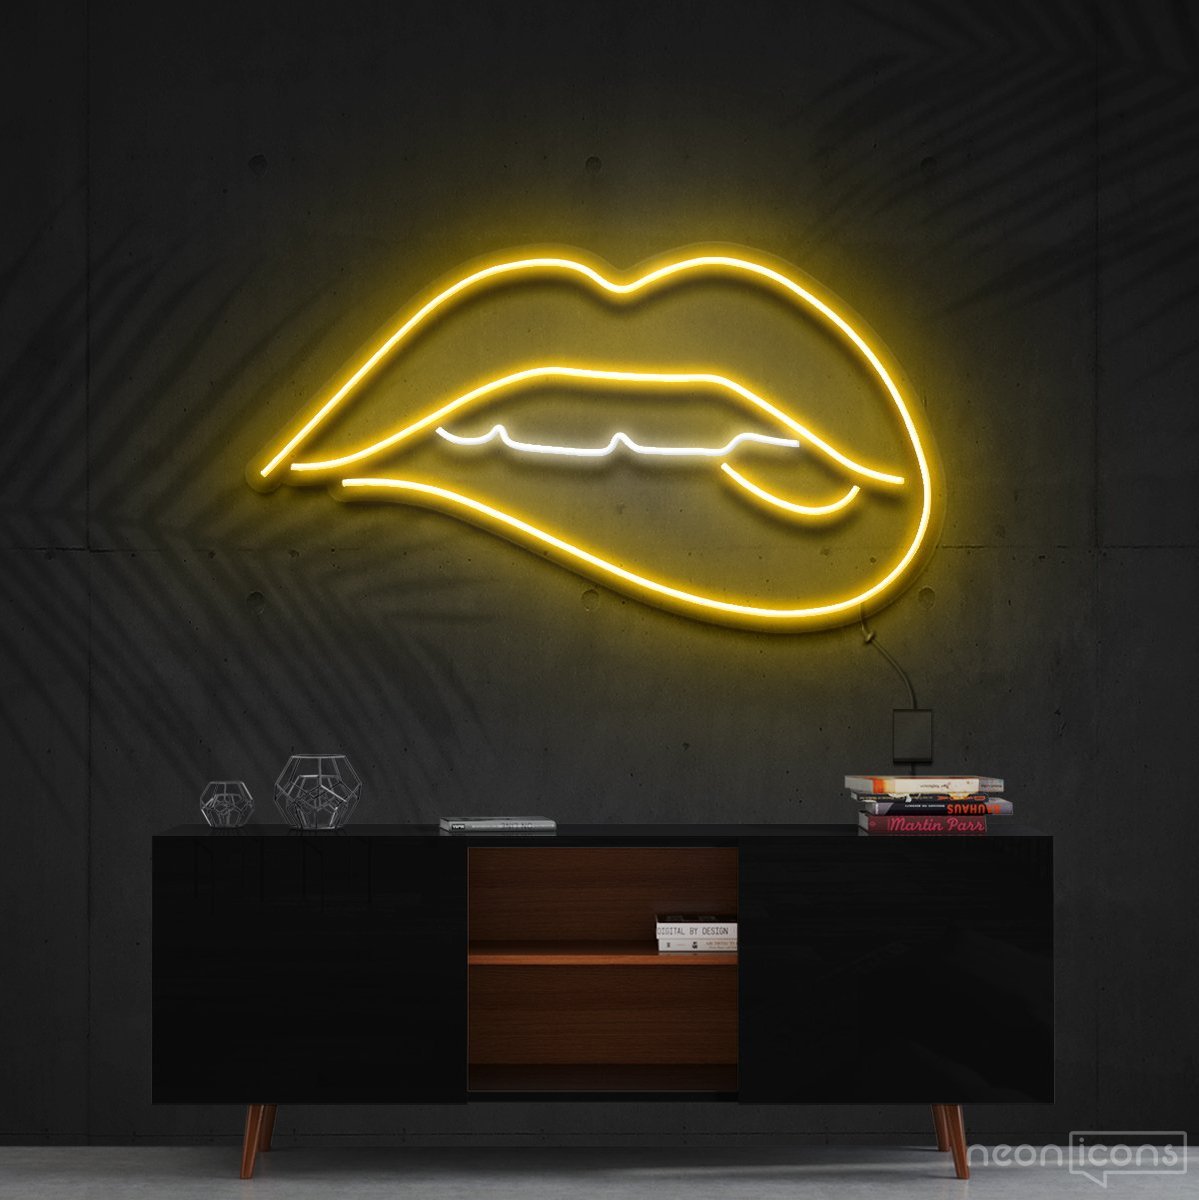 "Lips Biting" White Neon Sign 60cm (2ft) / Yellow / Cut to Shape by Neon Icons